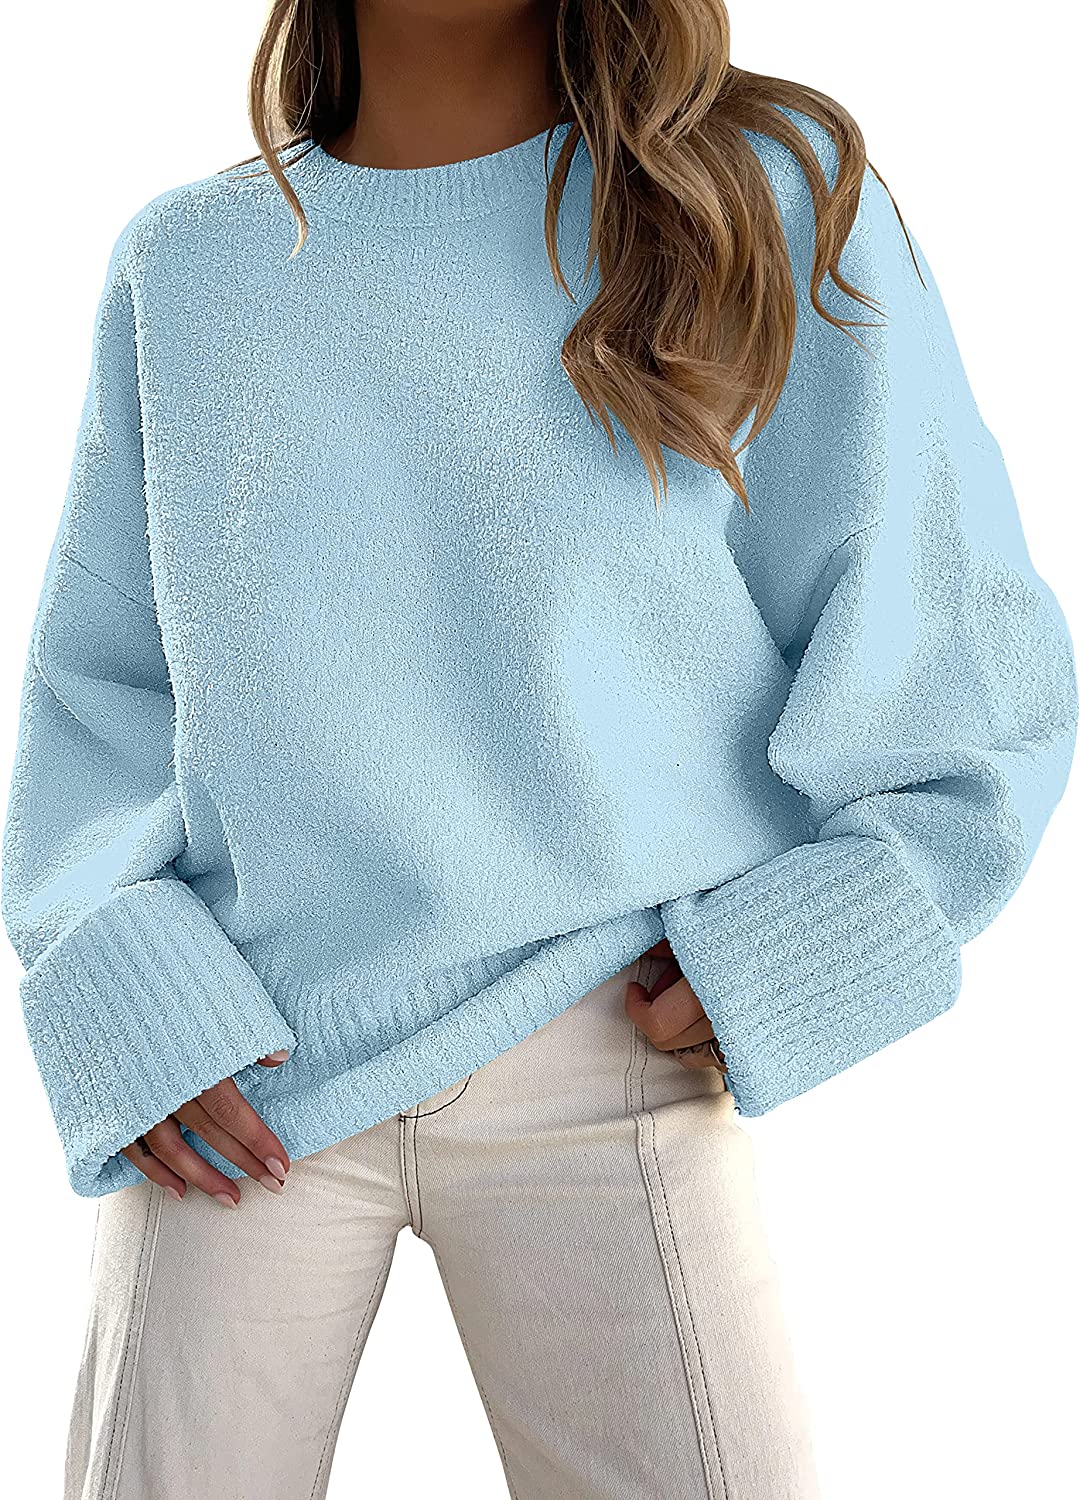 Women's Fuzzy Knit Long Sleeve Sweater by ANRABESS - Fall Fashion